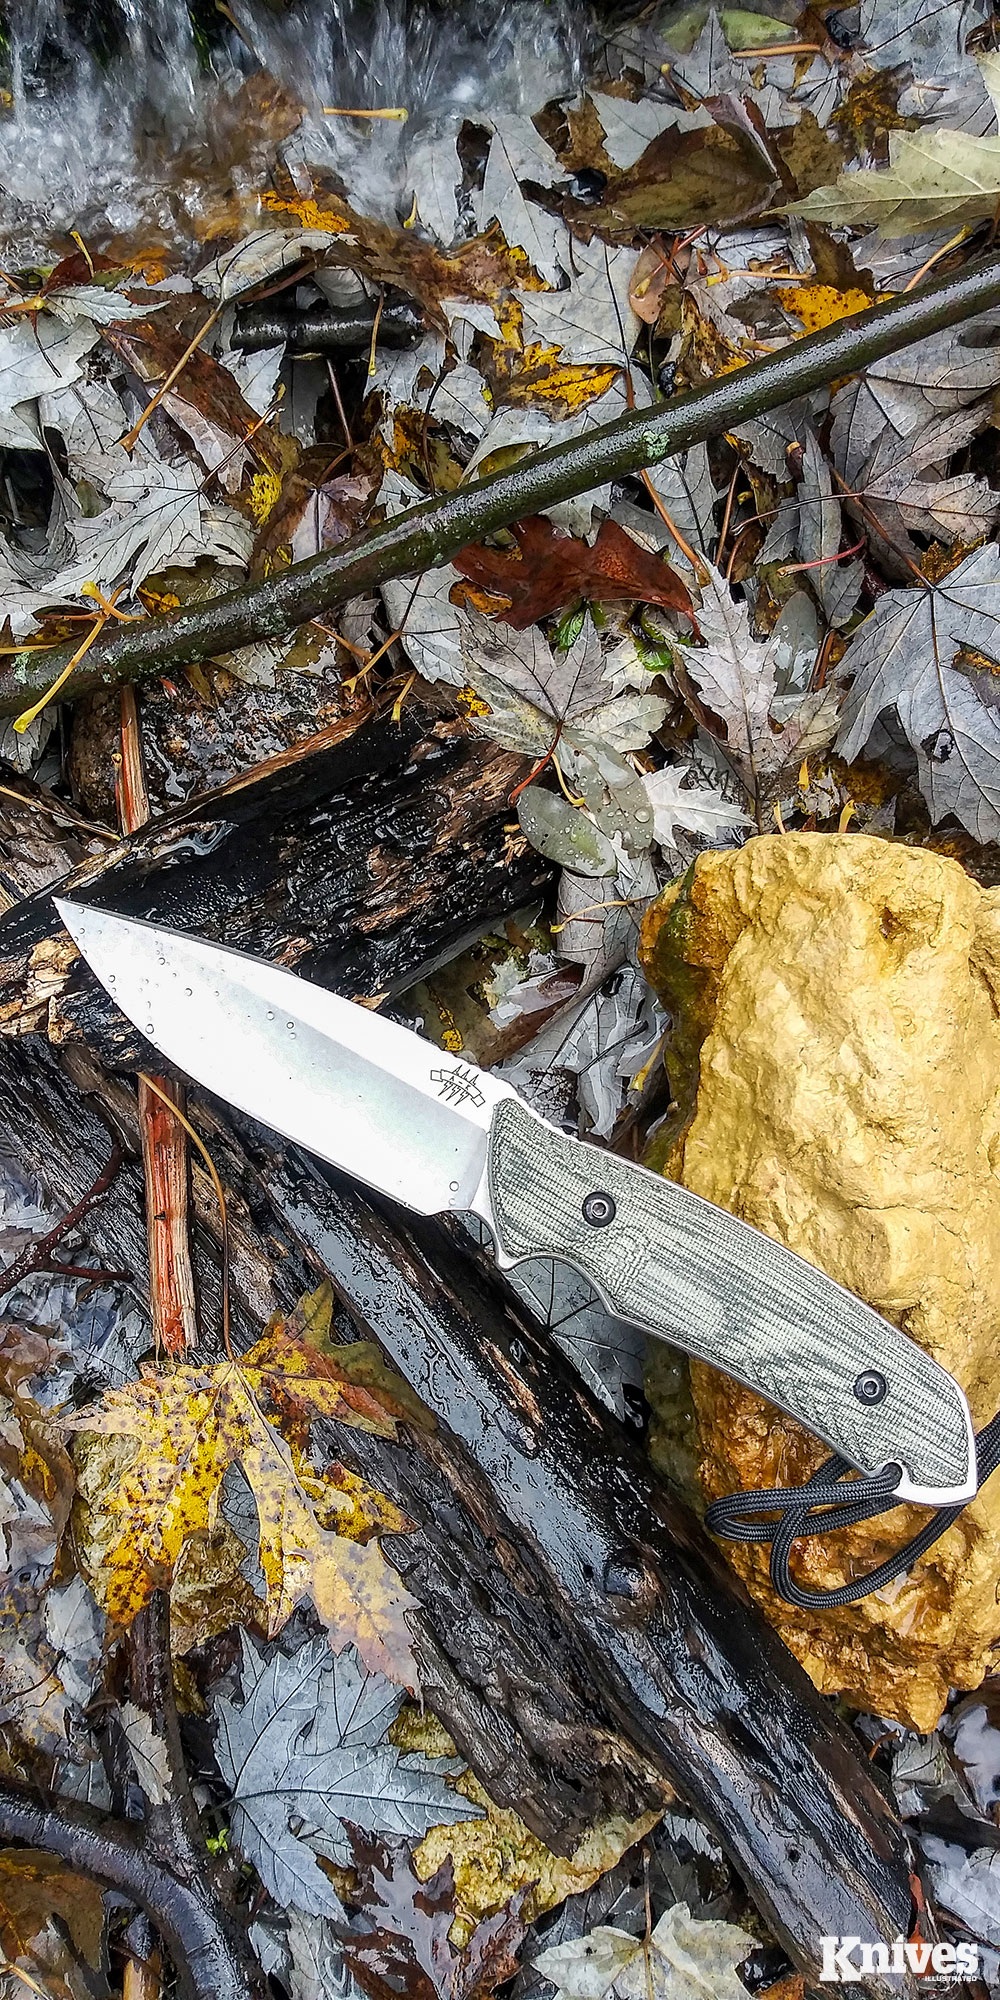 Built for the long haul, the Attleboro Knife is a very capable and comfortable field knife.